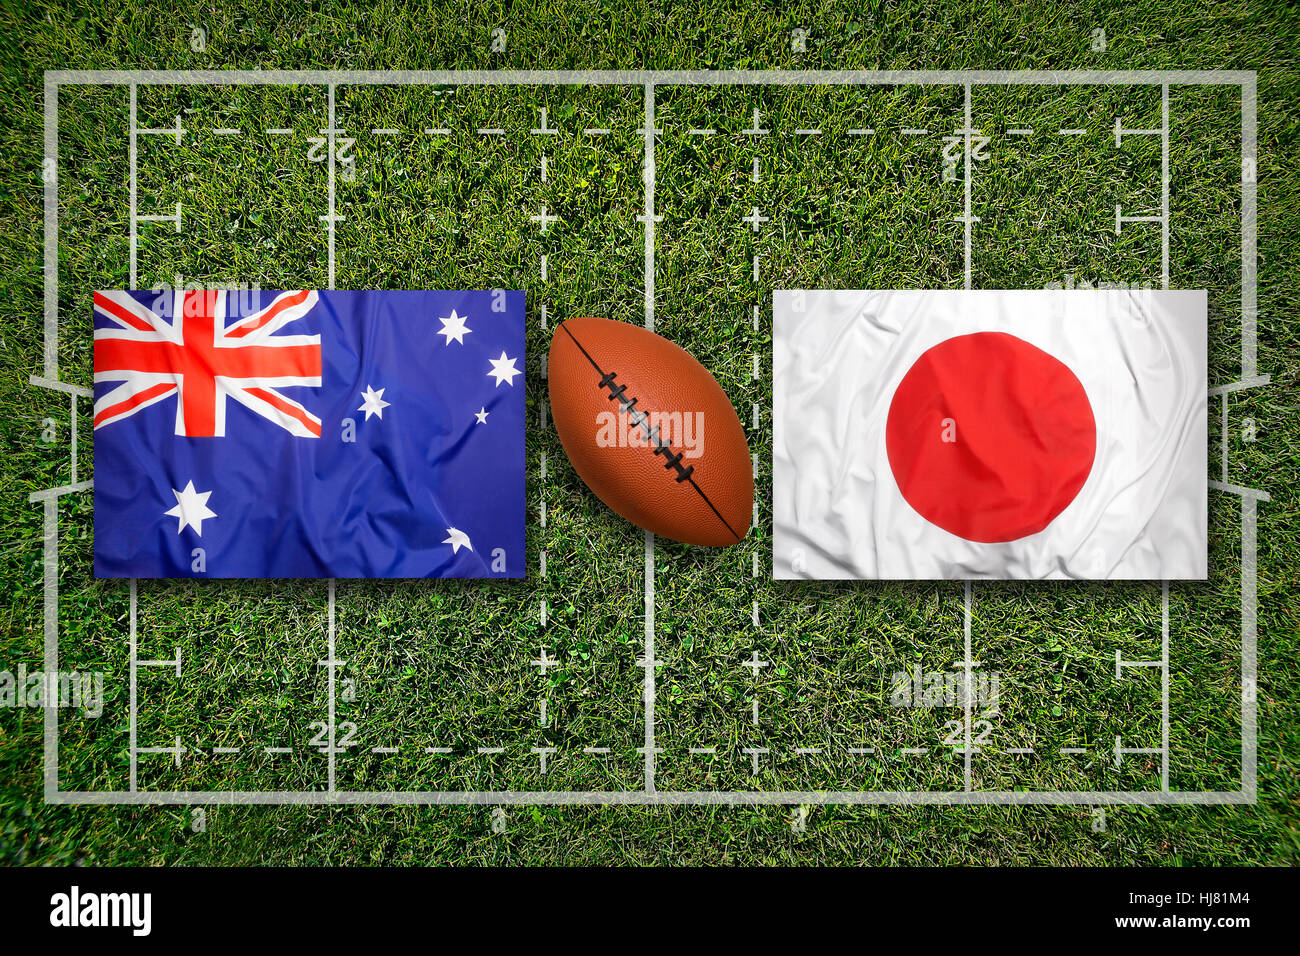 Australia vs. Japan flags on green rugby field Stock Photo